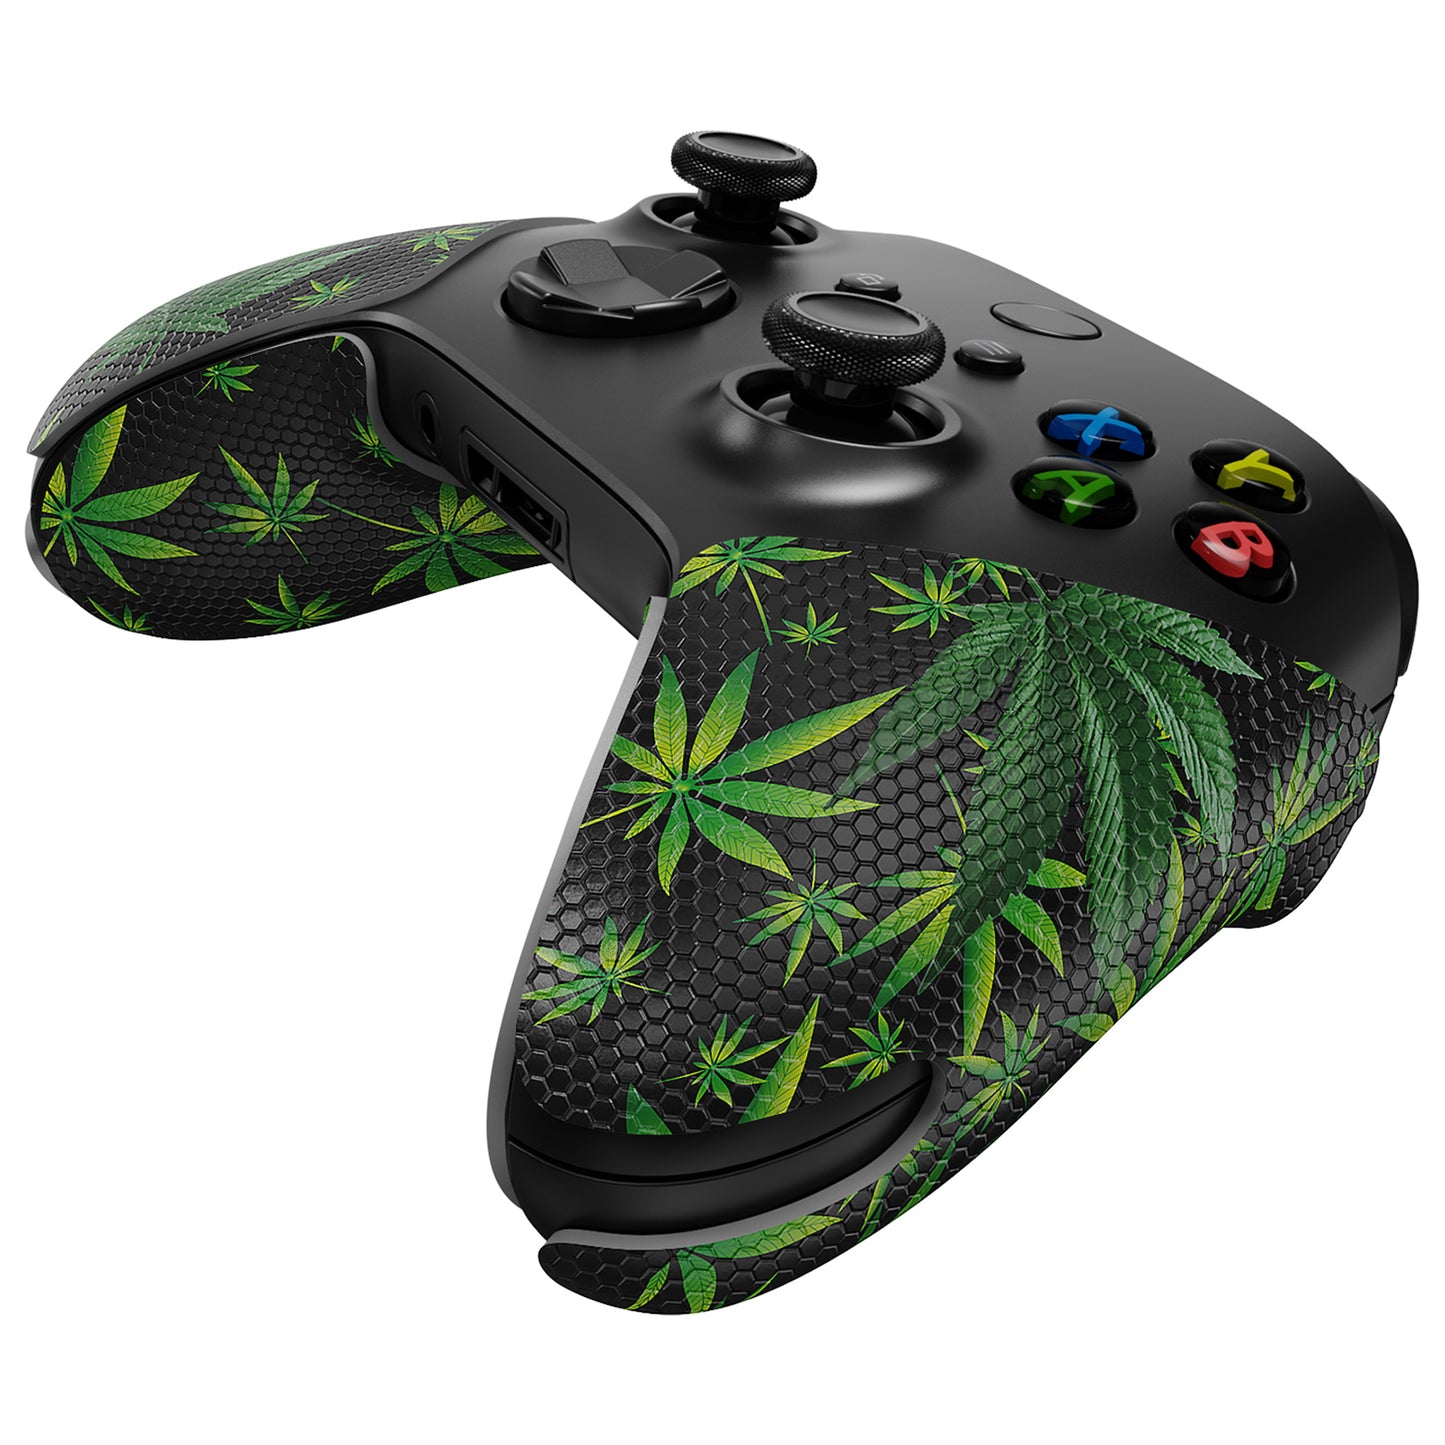 PlayVital Green Weeds Anti-Skid Sweat-Absorbent Controller Grip for Xbox Series X/S Controller, Professional Textured Soft Rubber Pads Handle Grips for Xbox Series X/S Controller - X3PJ045 PlayVital